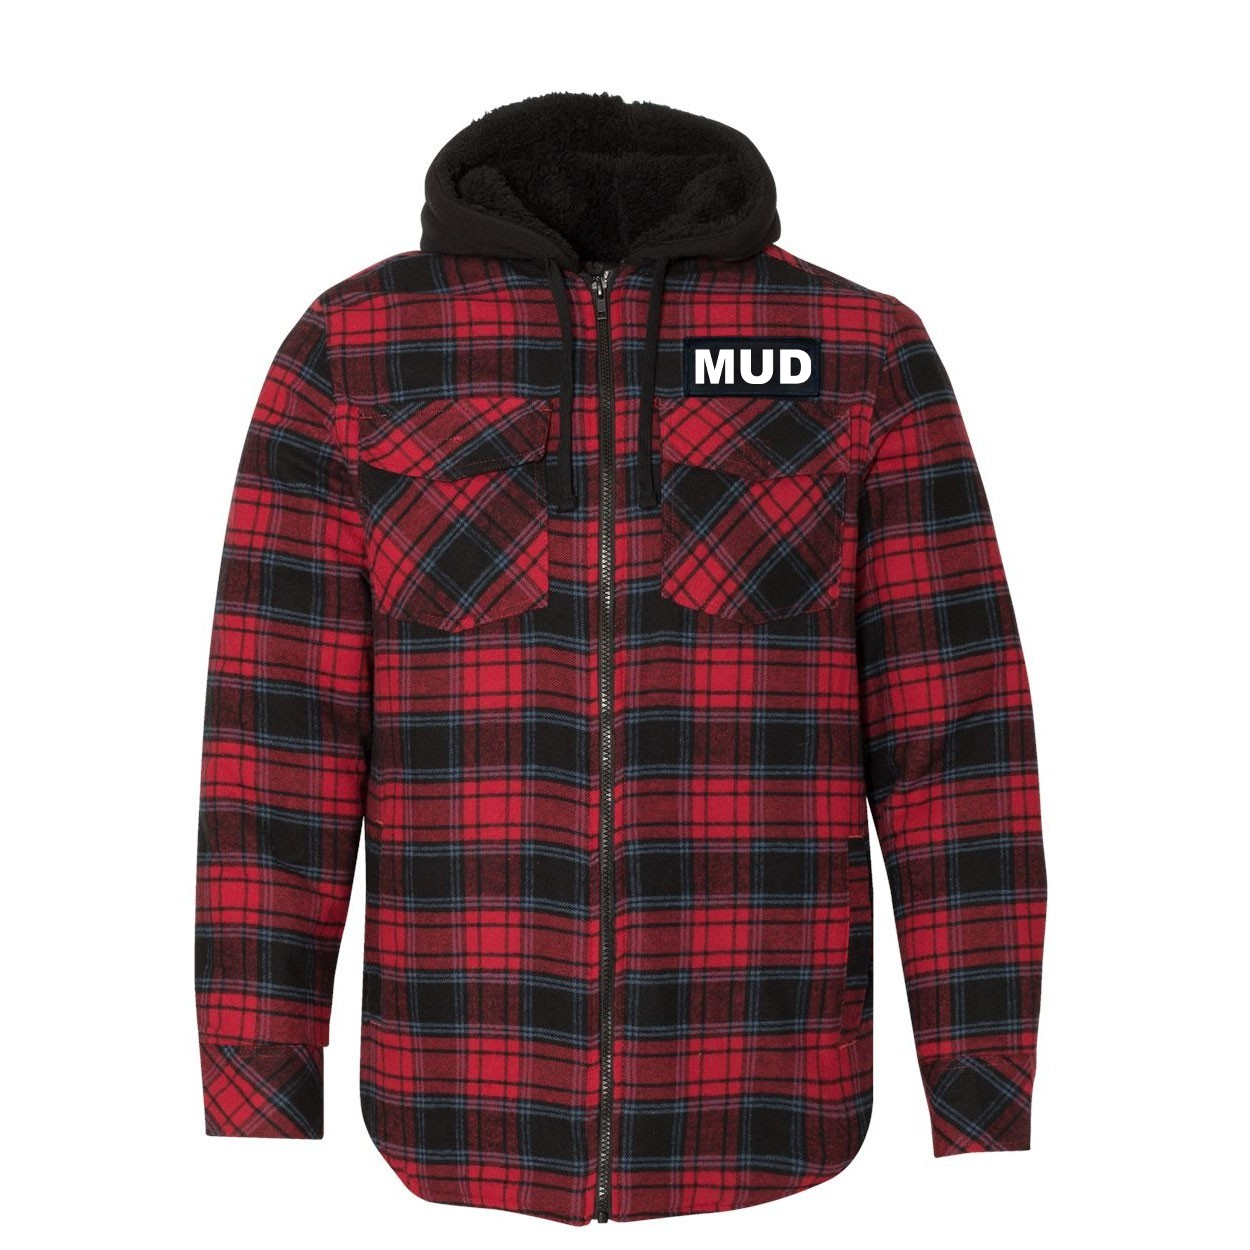 Mud Brand Logo Classic Unisex Full Zip Woven Patch Hooded Flannel Jacket Red/Black Buffalo